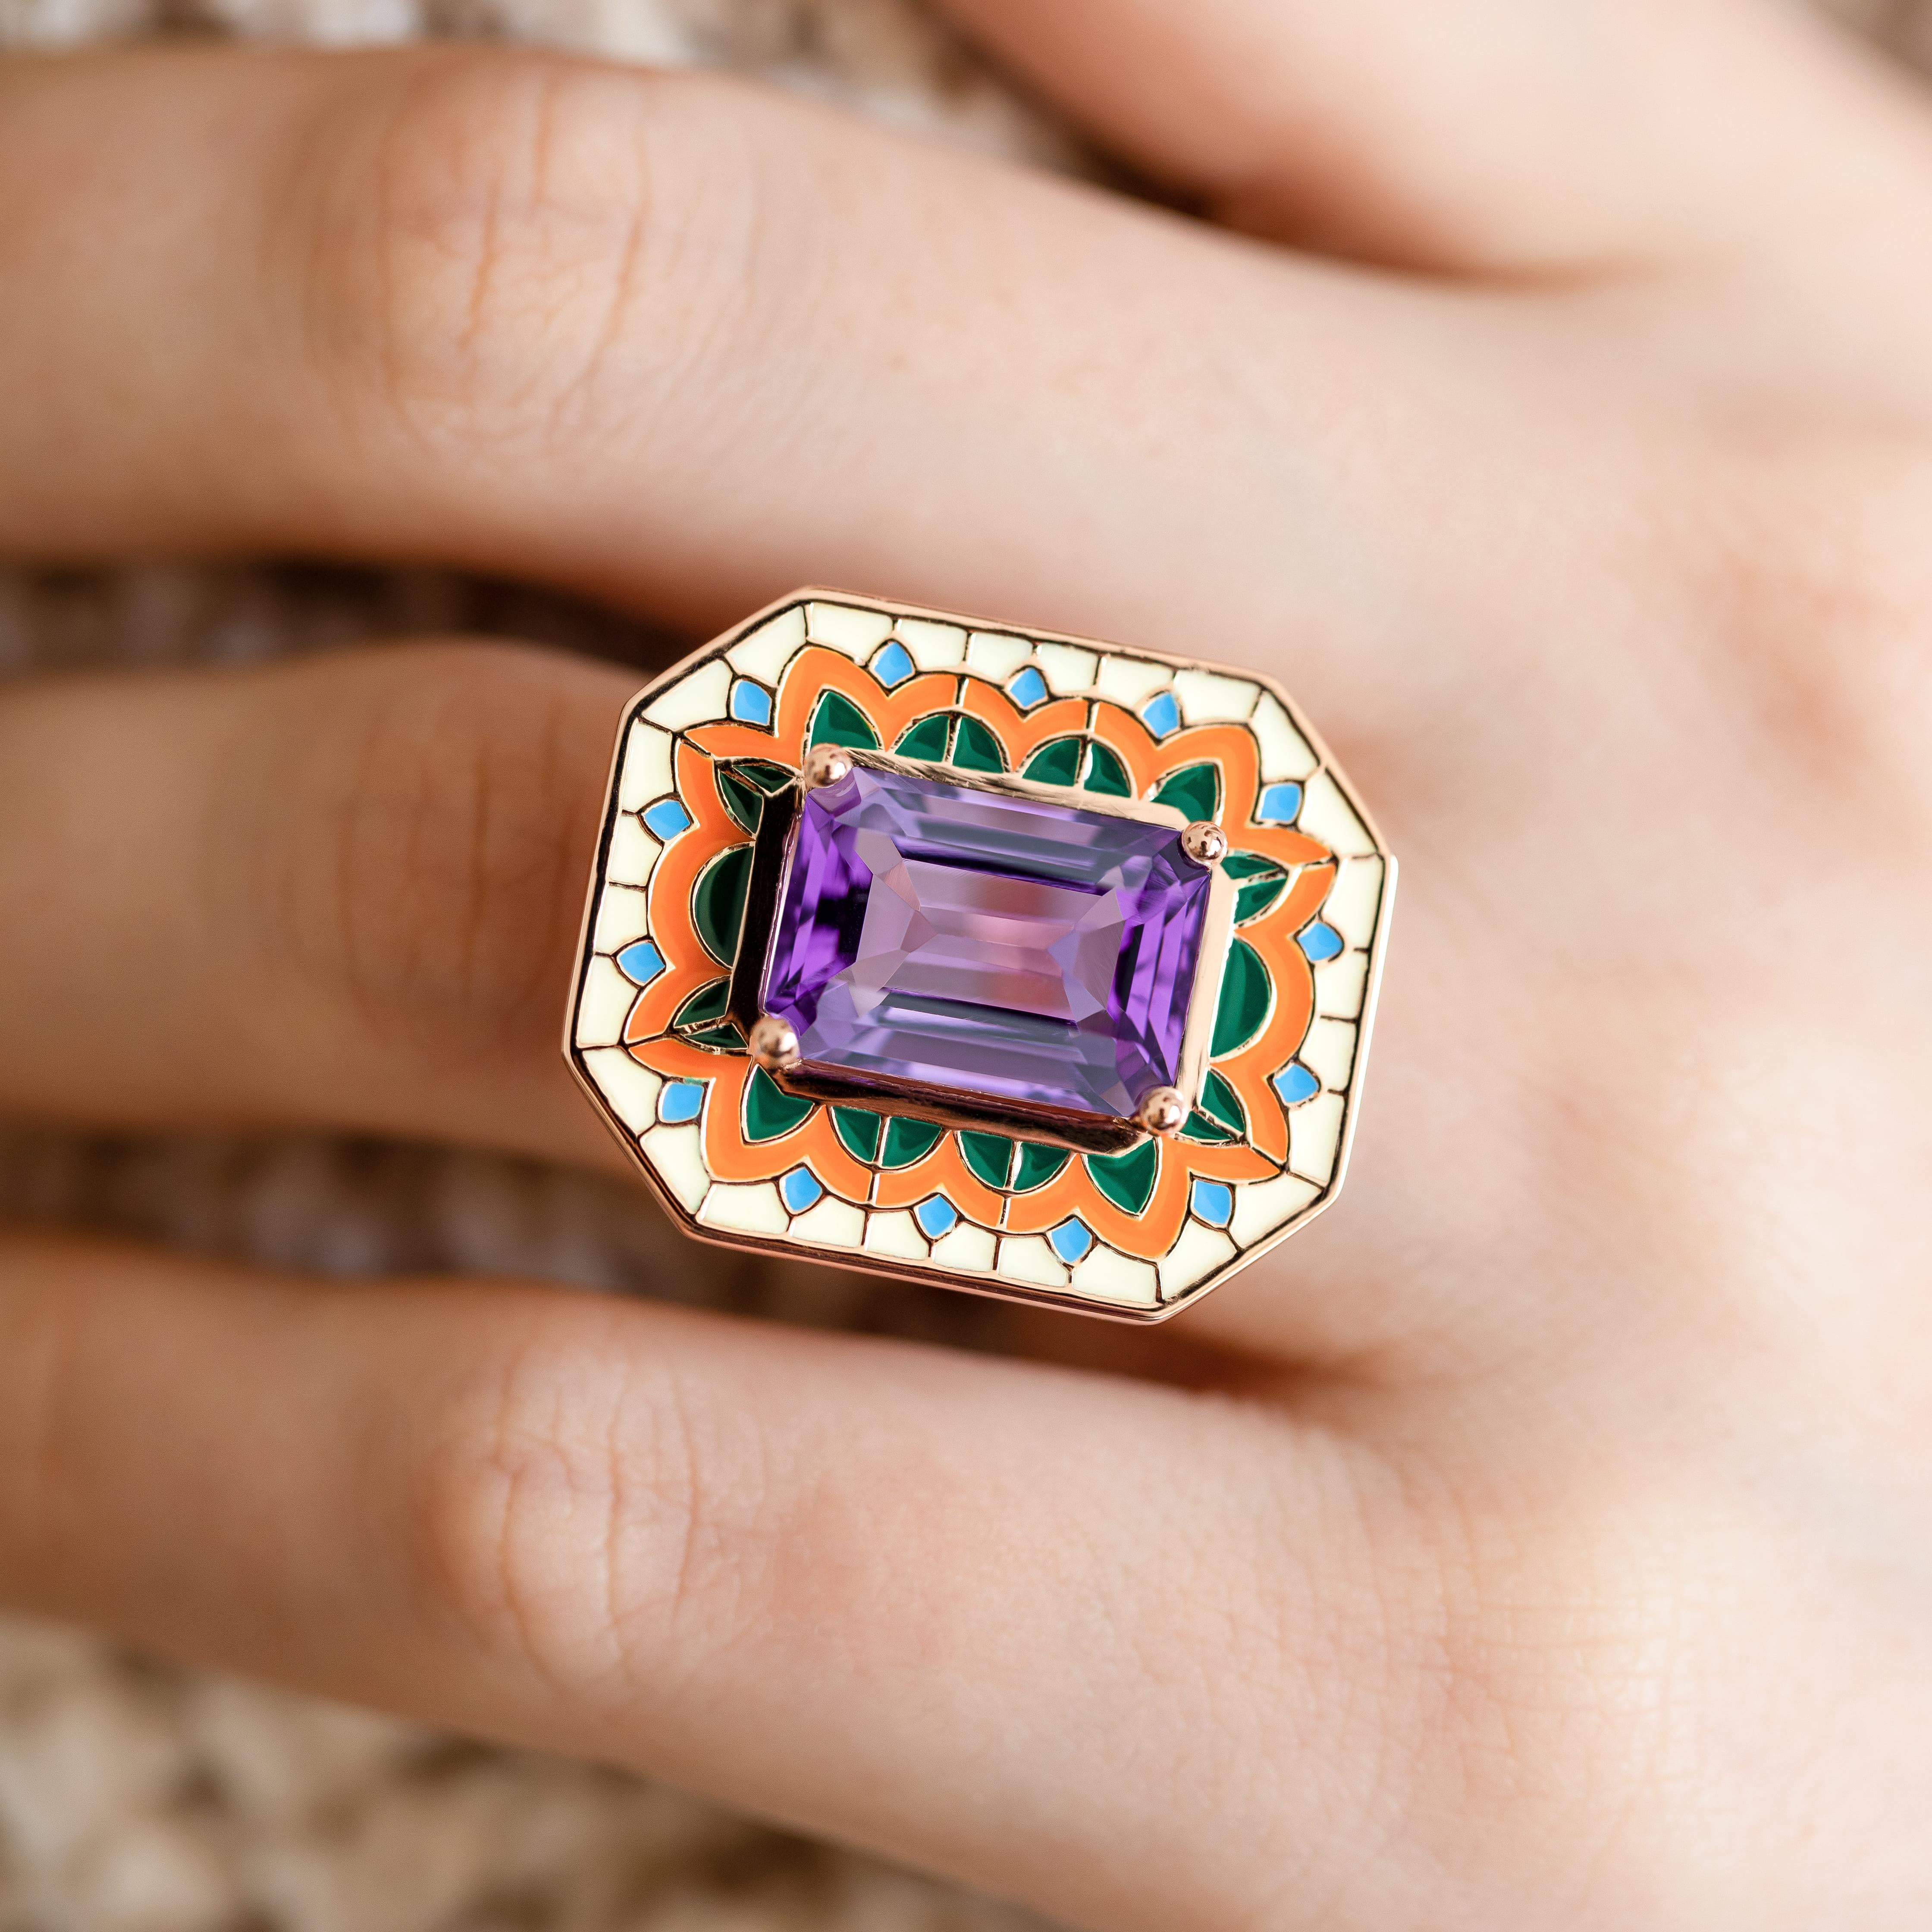 Art Deco Style Ring, 6.00-7.00 Ct Amethyst Stone and Colorful Enamel Ring, 14K Gold Cocktail Ring or 925 Sterling Silver, Seljuk Collection Rings

This ring was made with quality materials and excellent handwork. I guarantee the quality assurance of